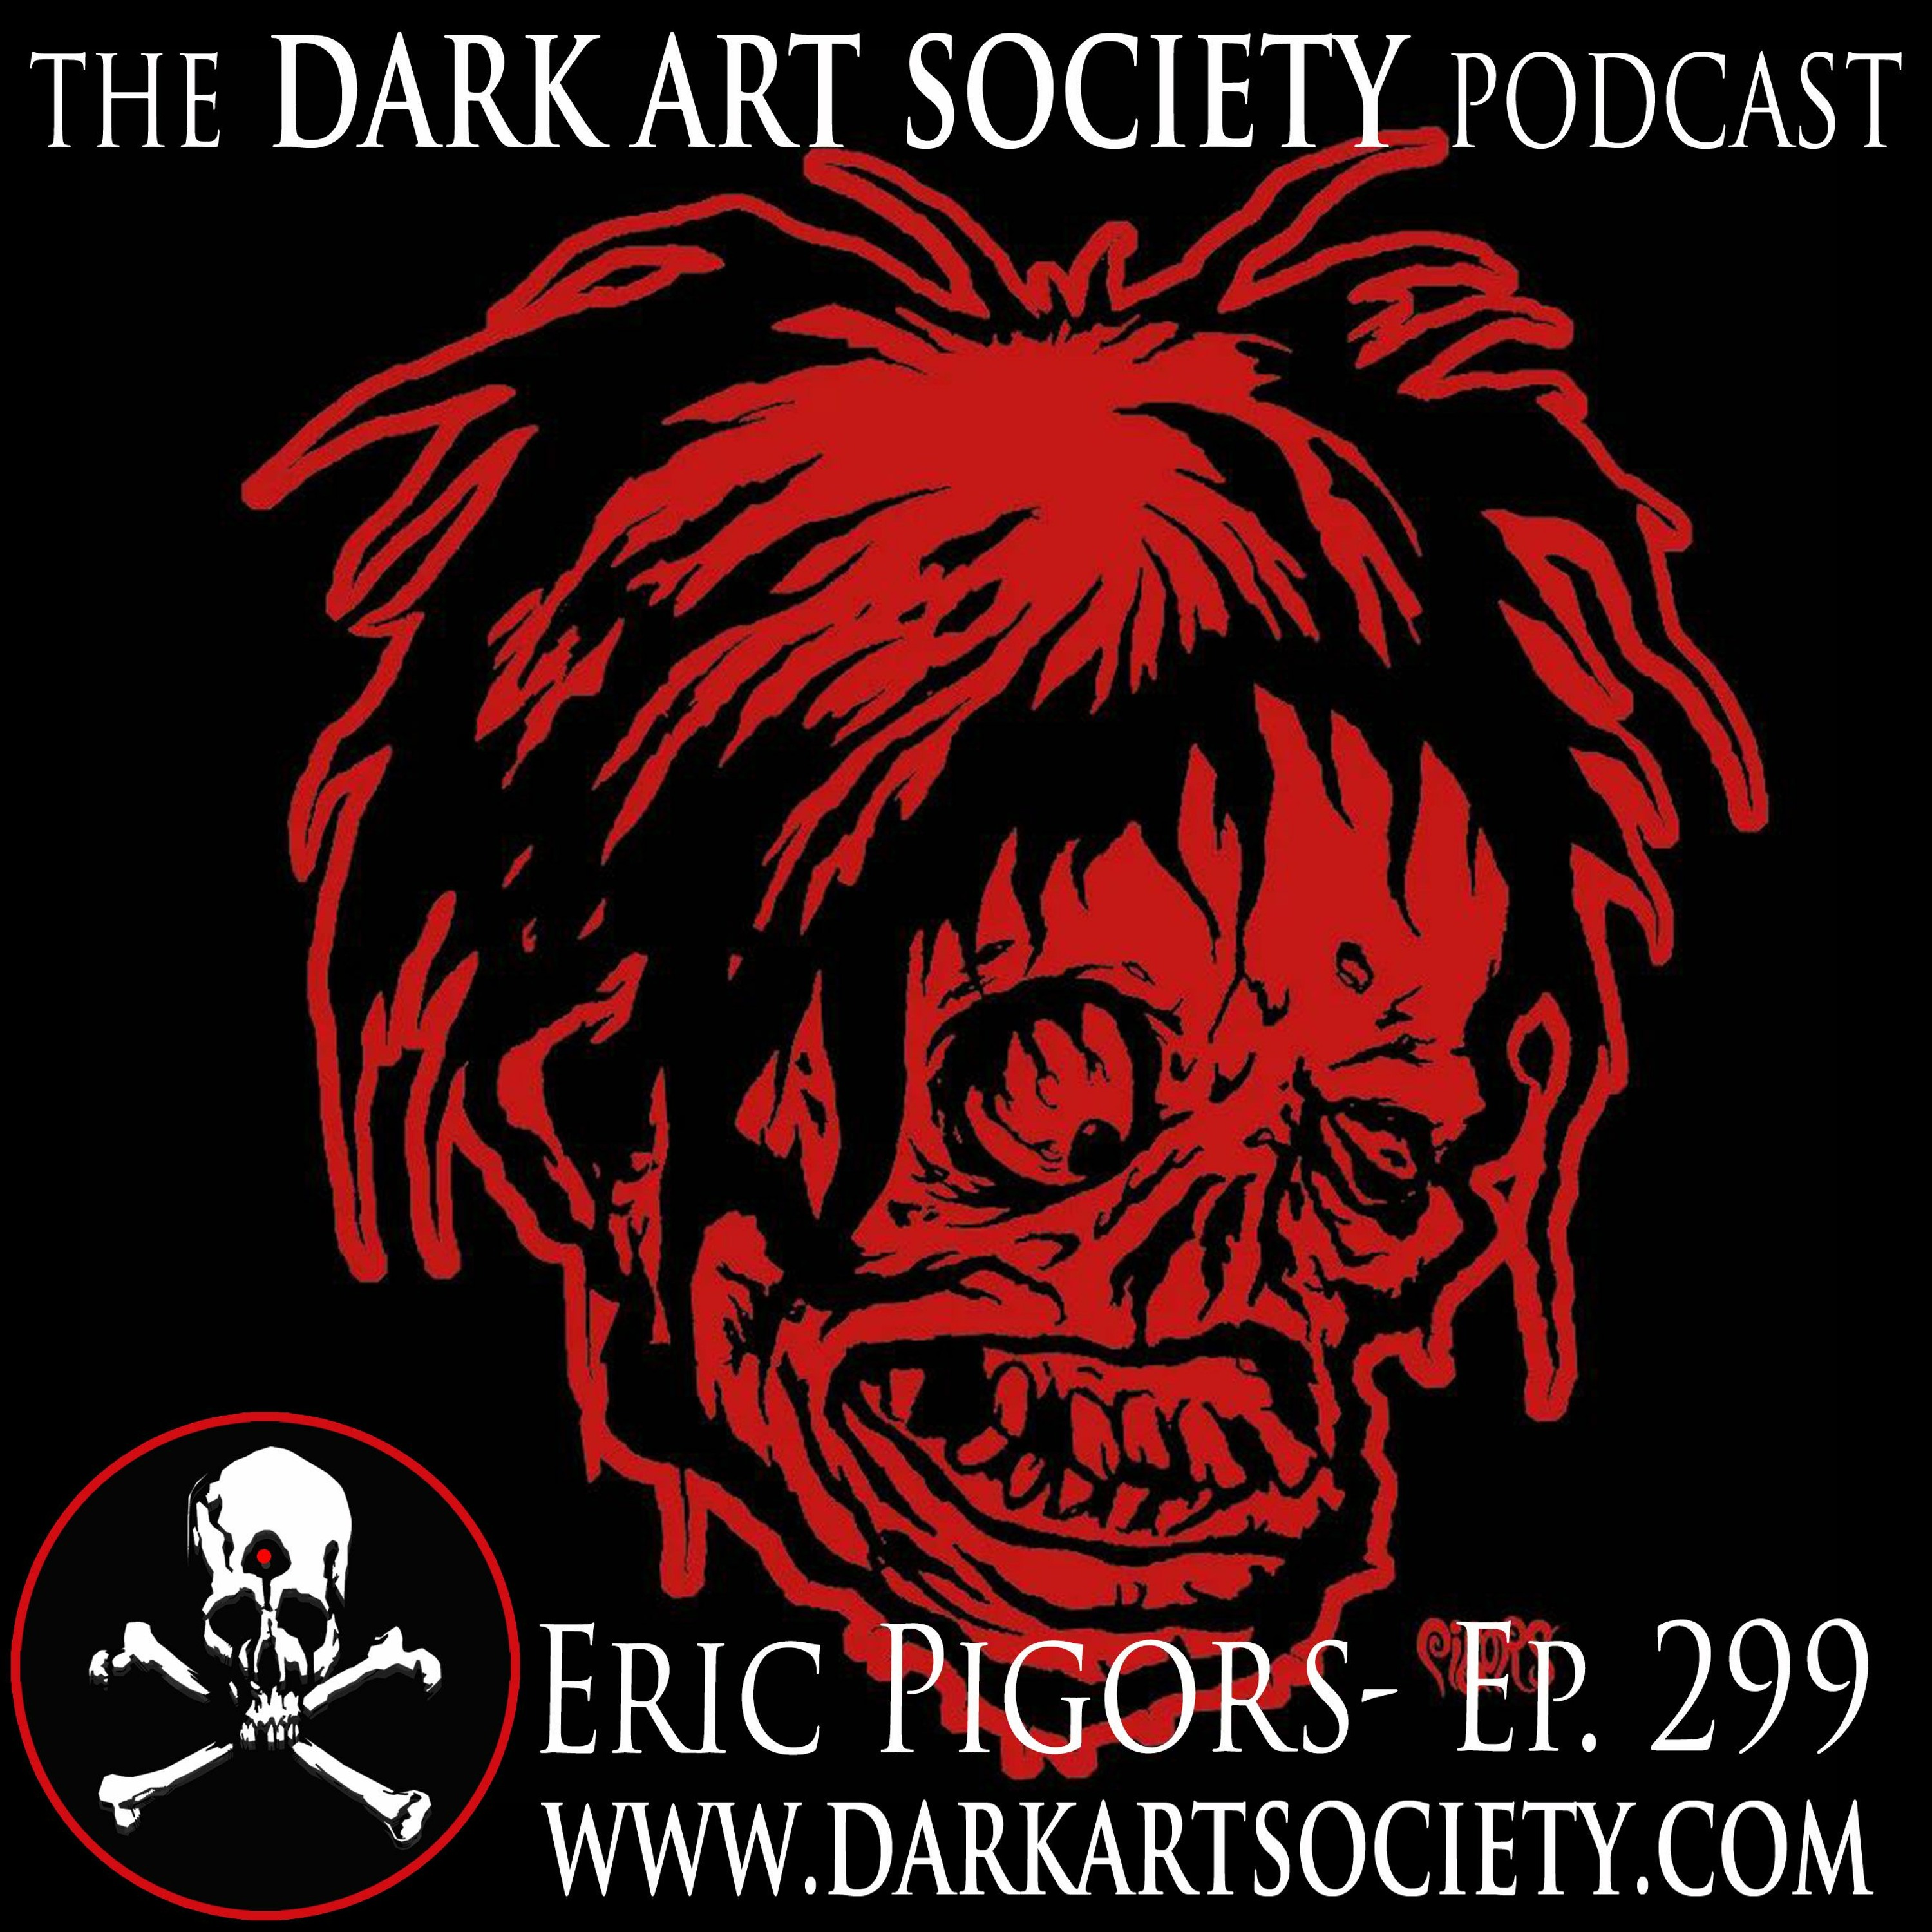 The Spirit of Halloween with Eric Pigors- Ep. 299